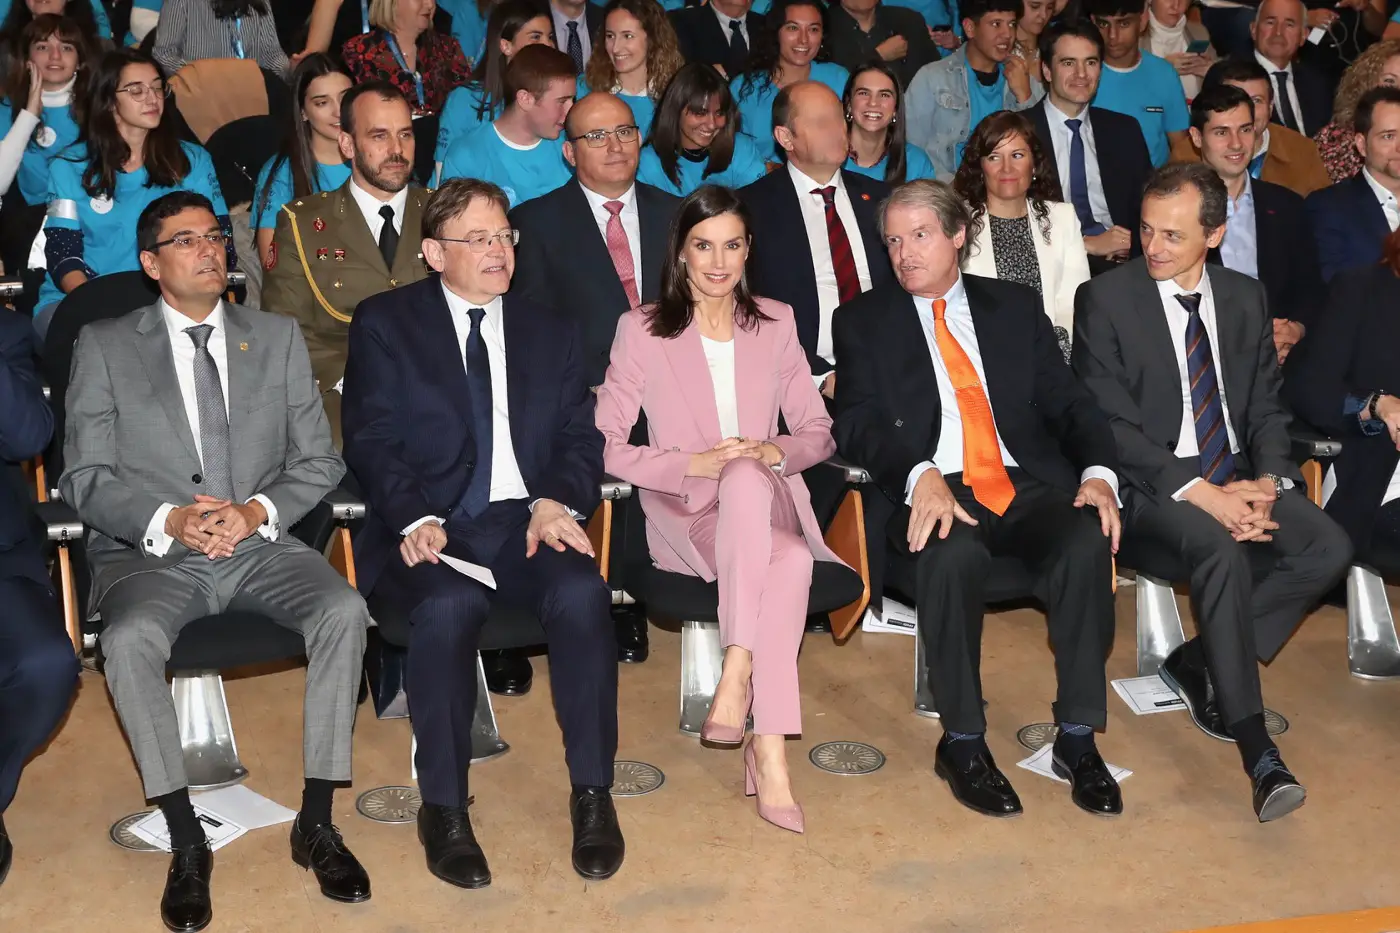 Queen Letizia also attended a presentation of the 2020 Awards Tour and the “Challenge” during University visit